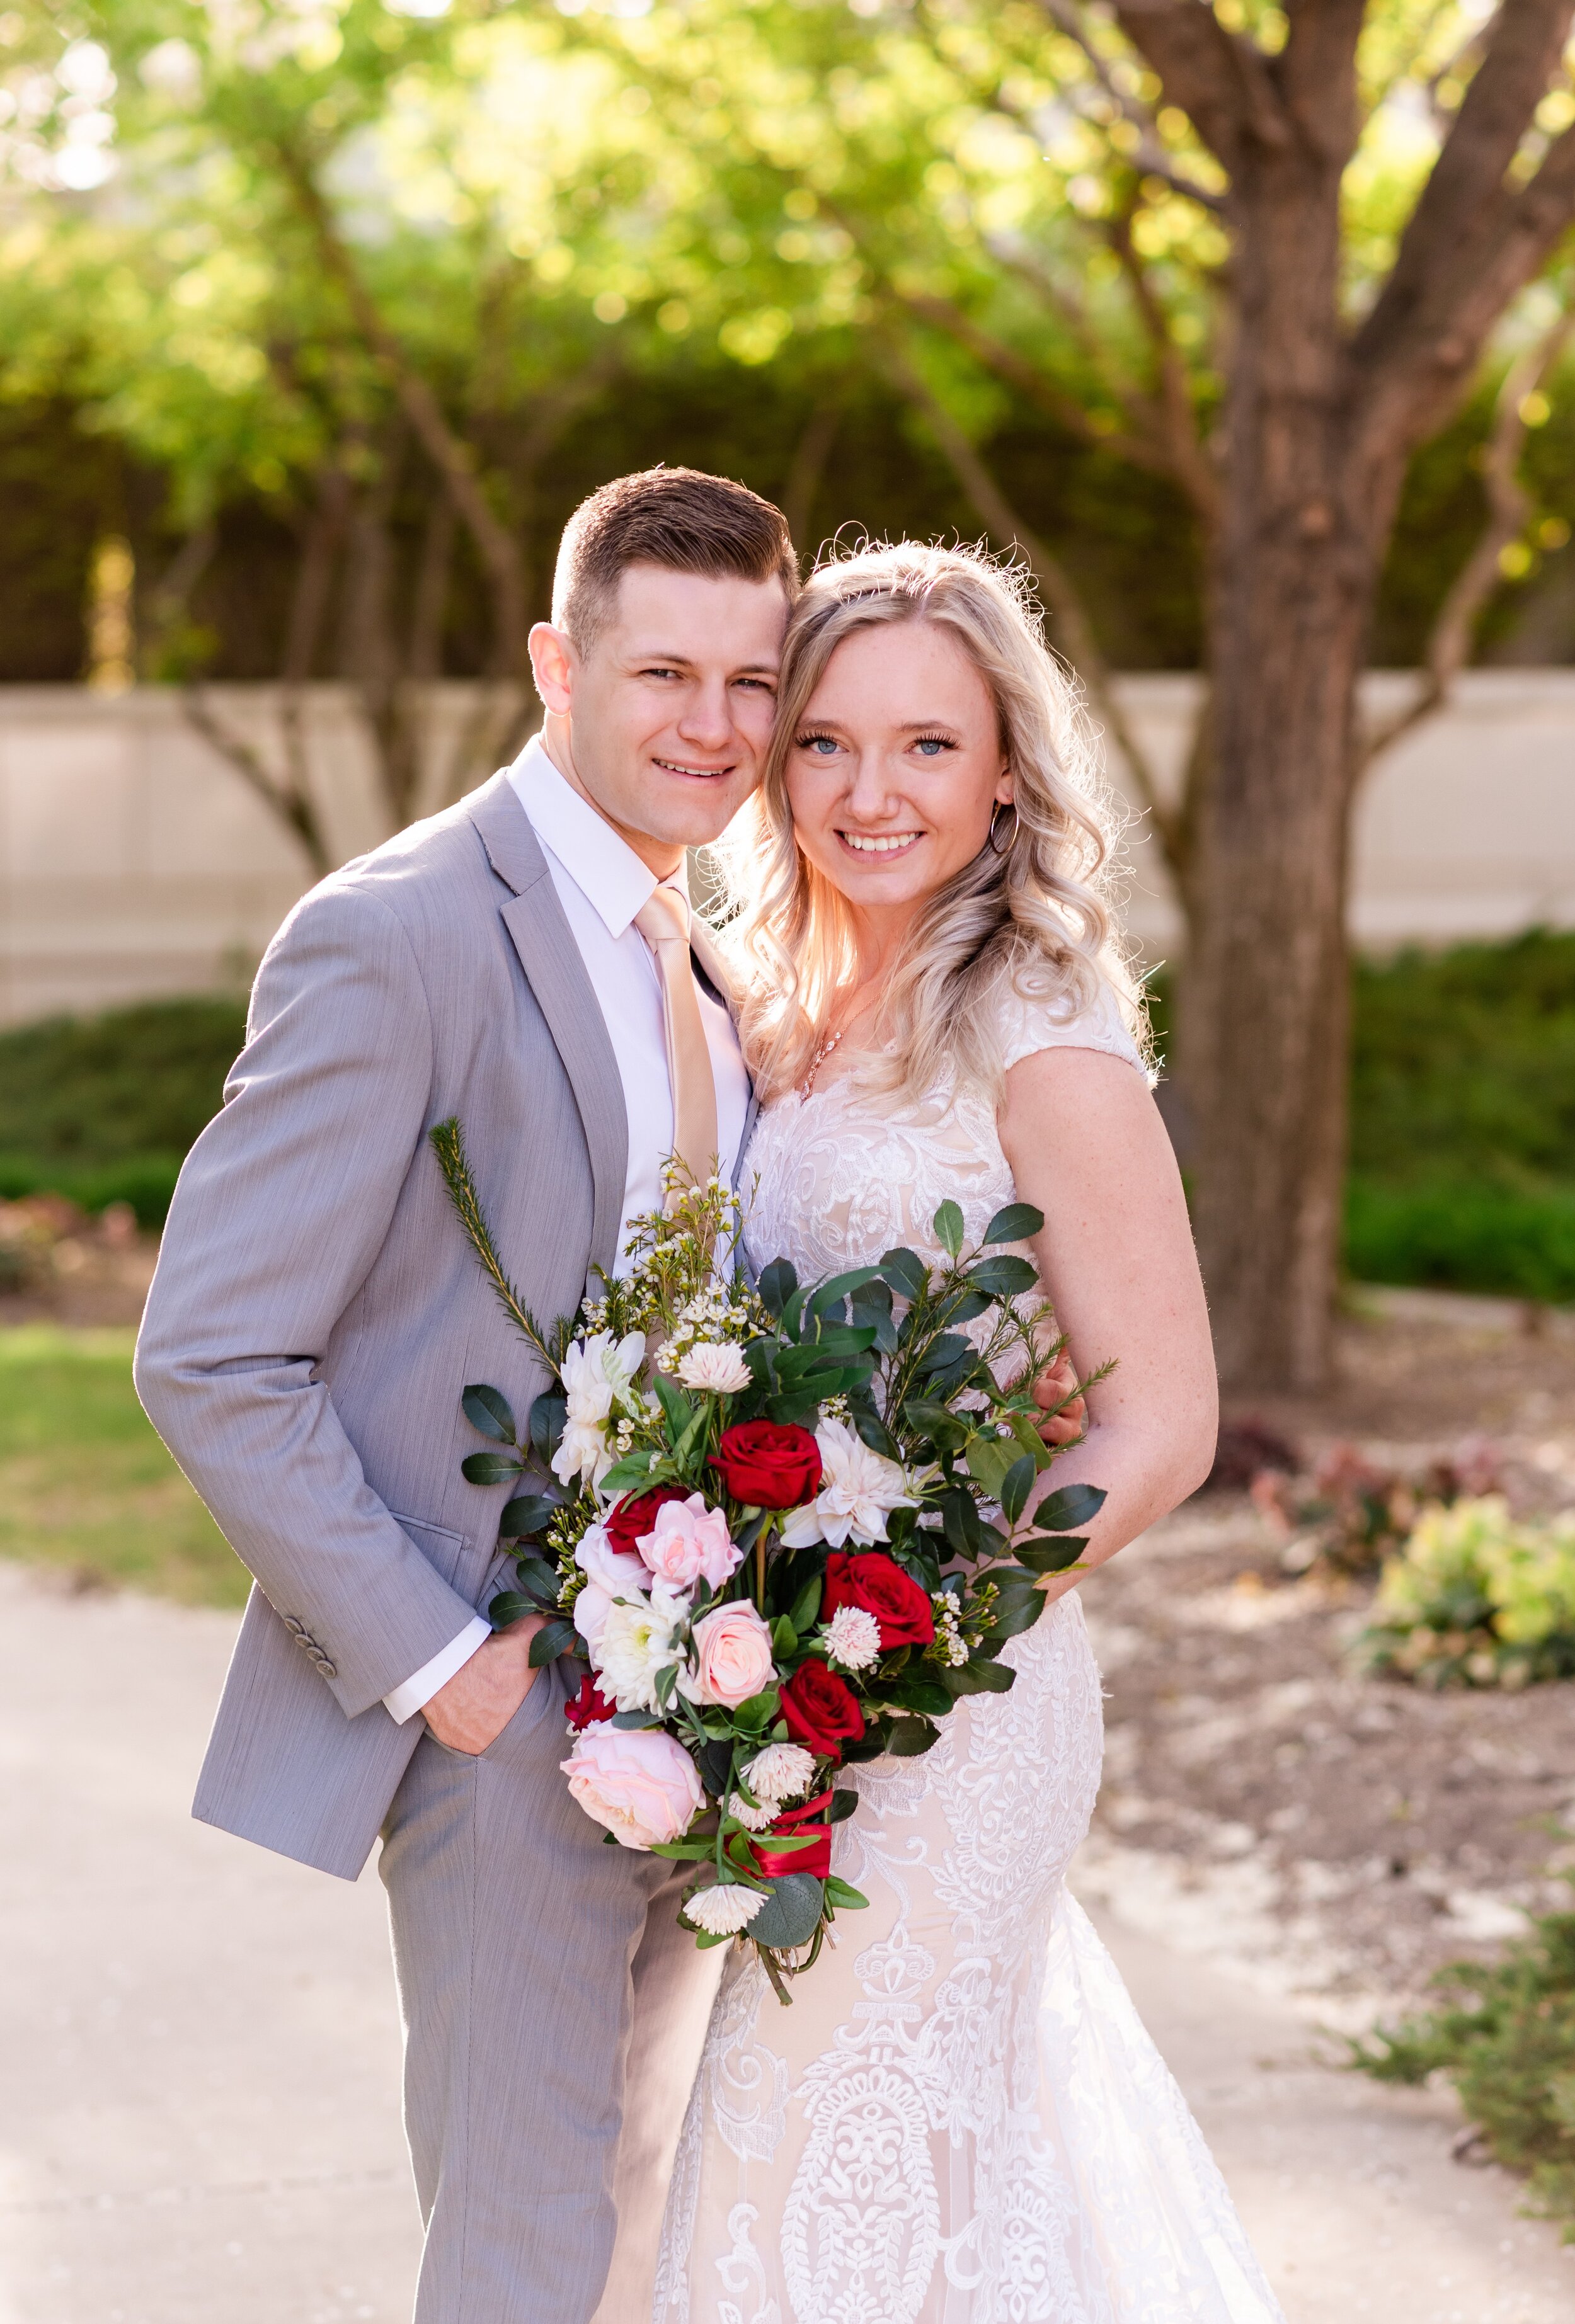 Red &amp; White Bouquet - Columbia River Washington Temple Bridals Wedding Photographer - Tri Cities Wedding Photographer - Morgan Tayler Photo &amp; Design - Moses Lake Temple Wedding Photographer